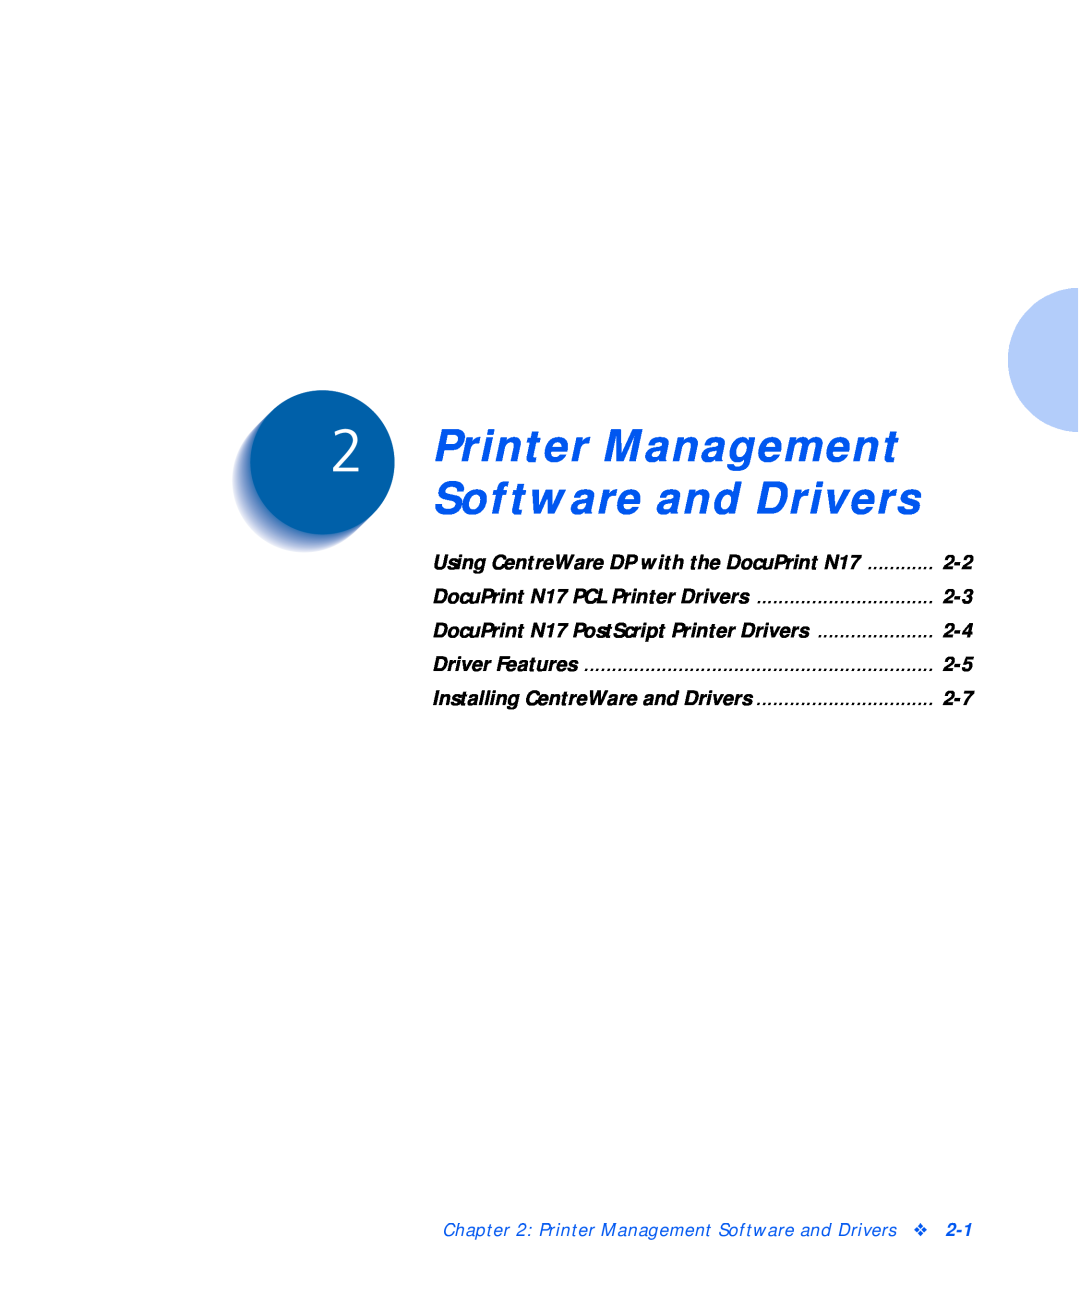 Xerox N17b Printer Management Software and Drivers, Using CentreWare DP with the DocuPrint N17, PostScript Printer Drivers 